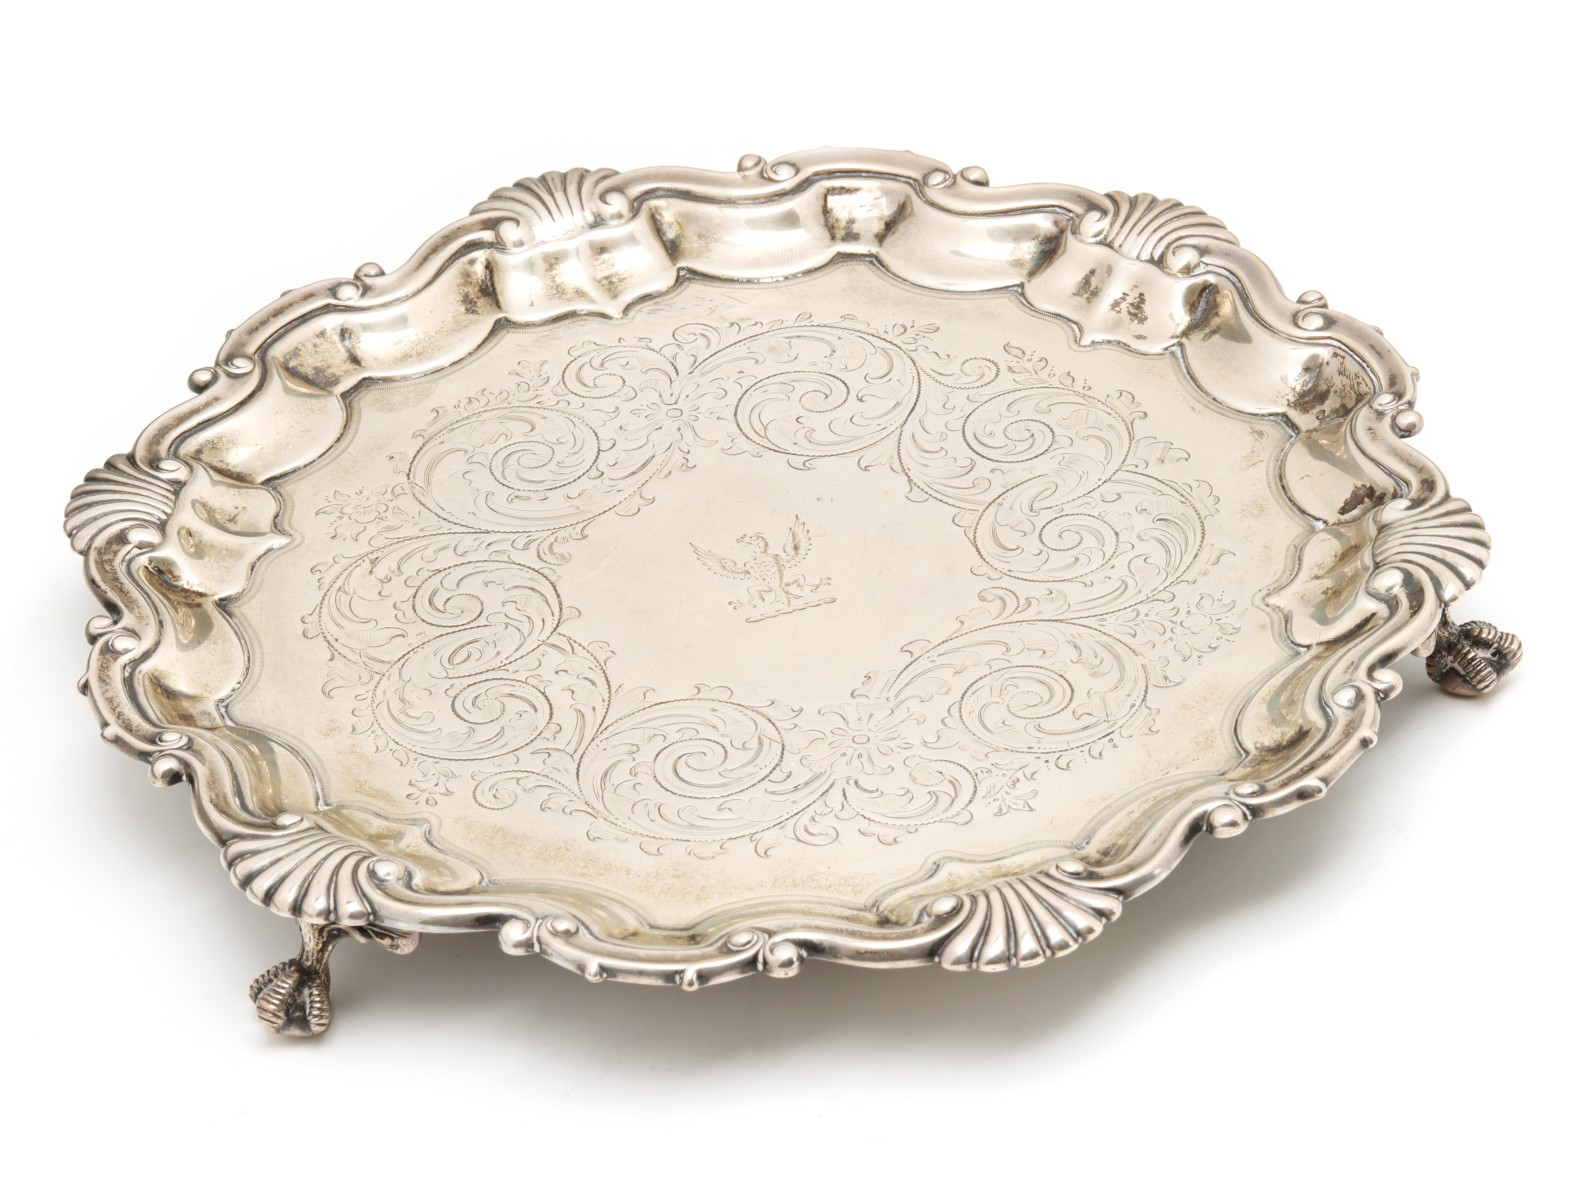 A LONDON 1882 STERLING SILVER SALVER